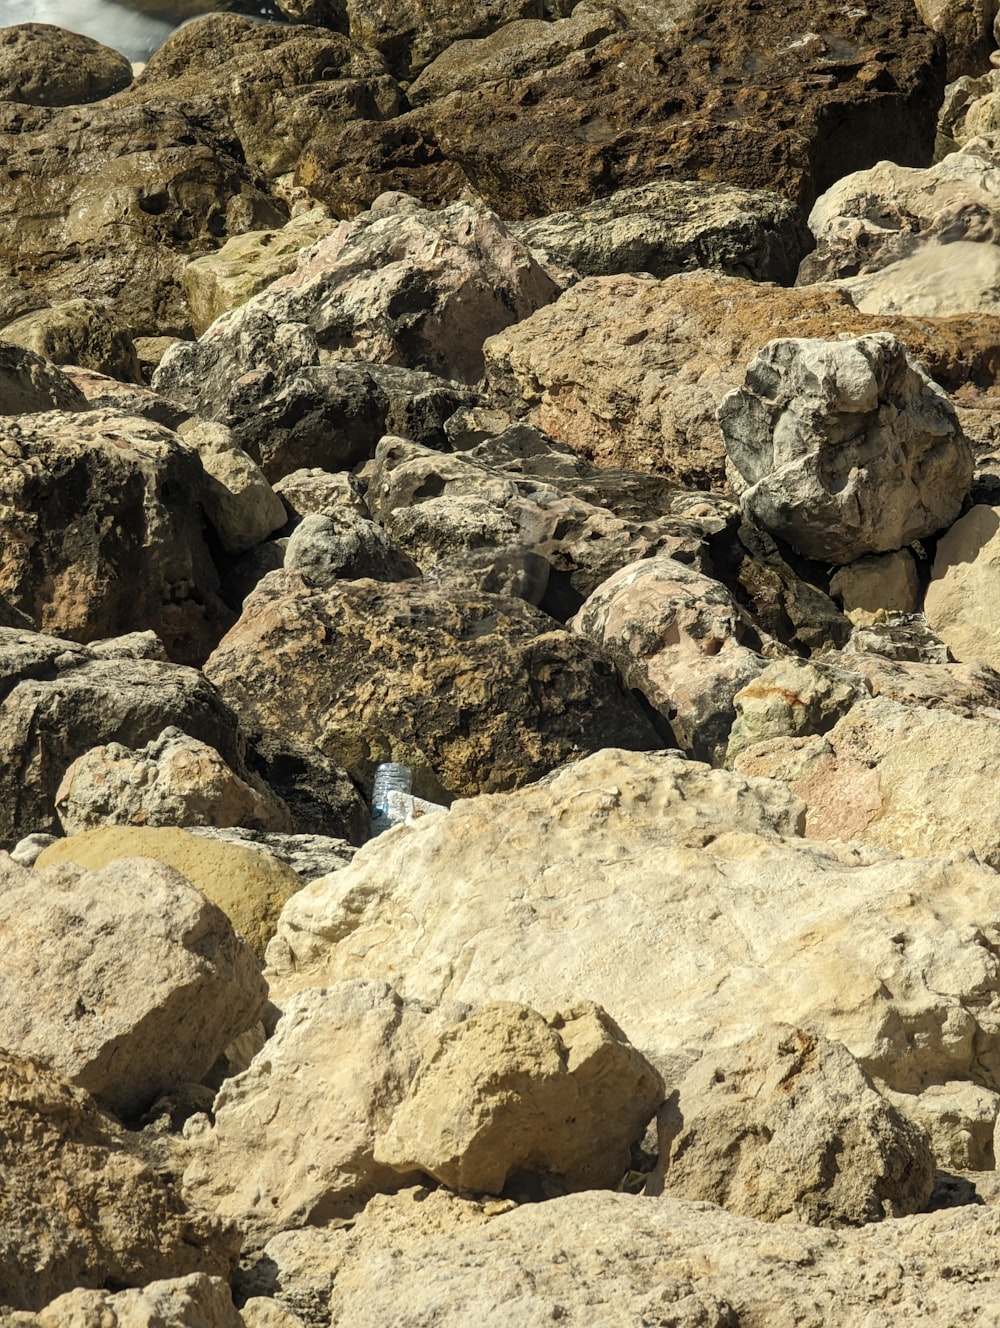 a bird is sitting on a rocky area